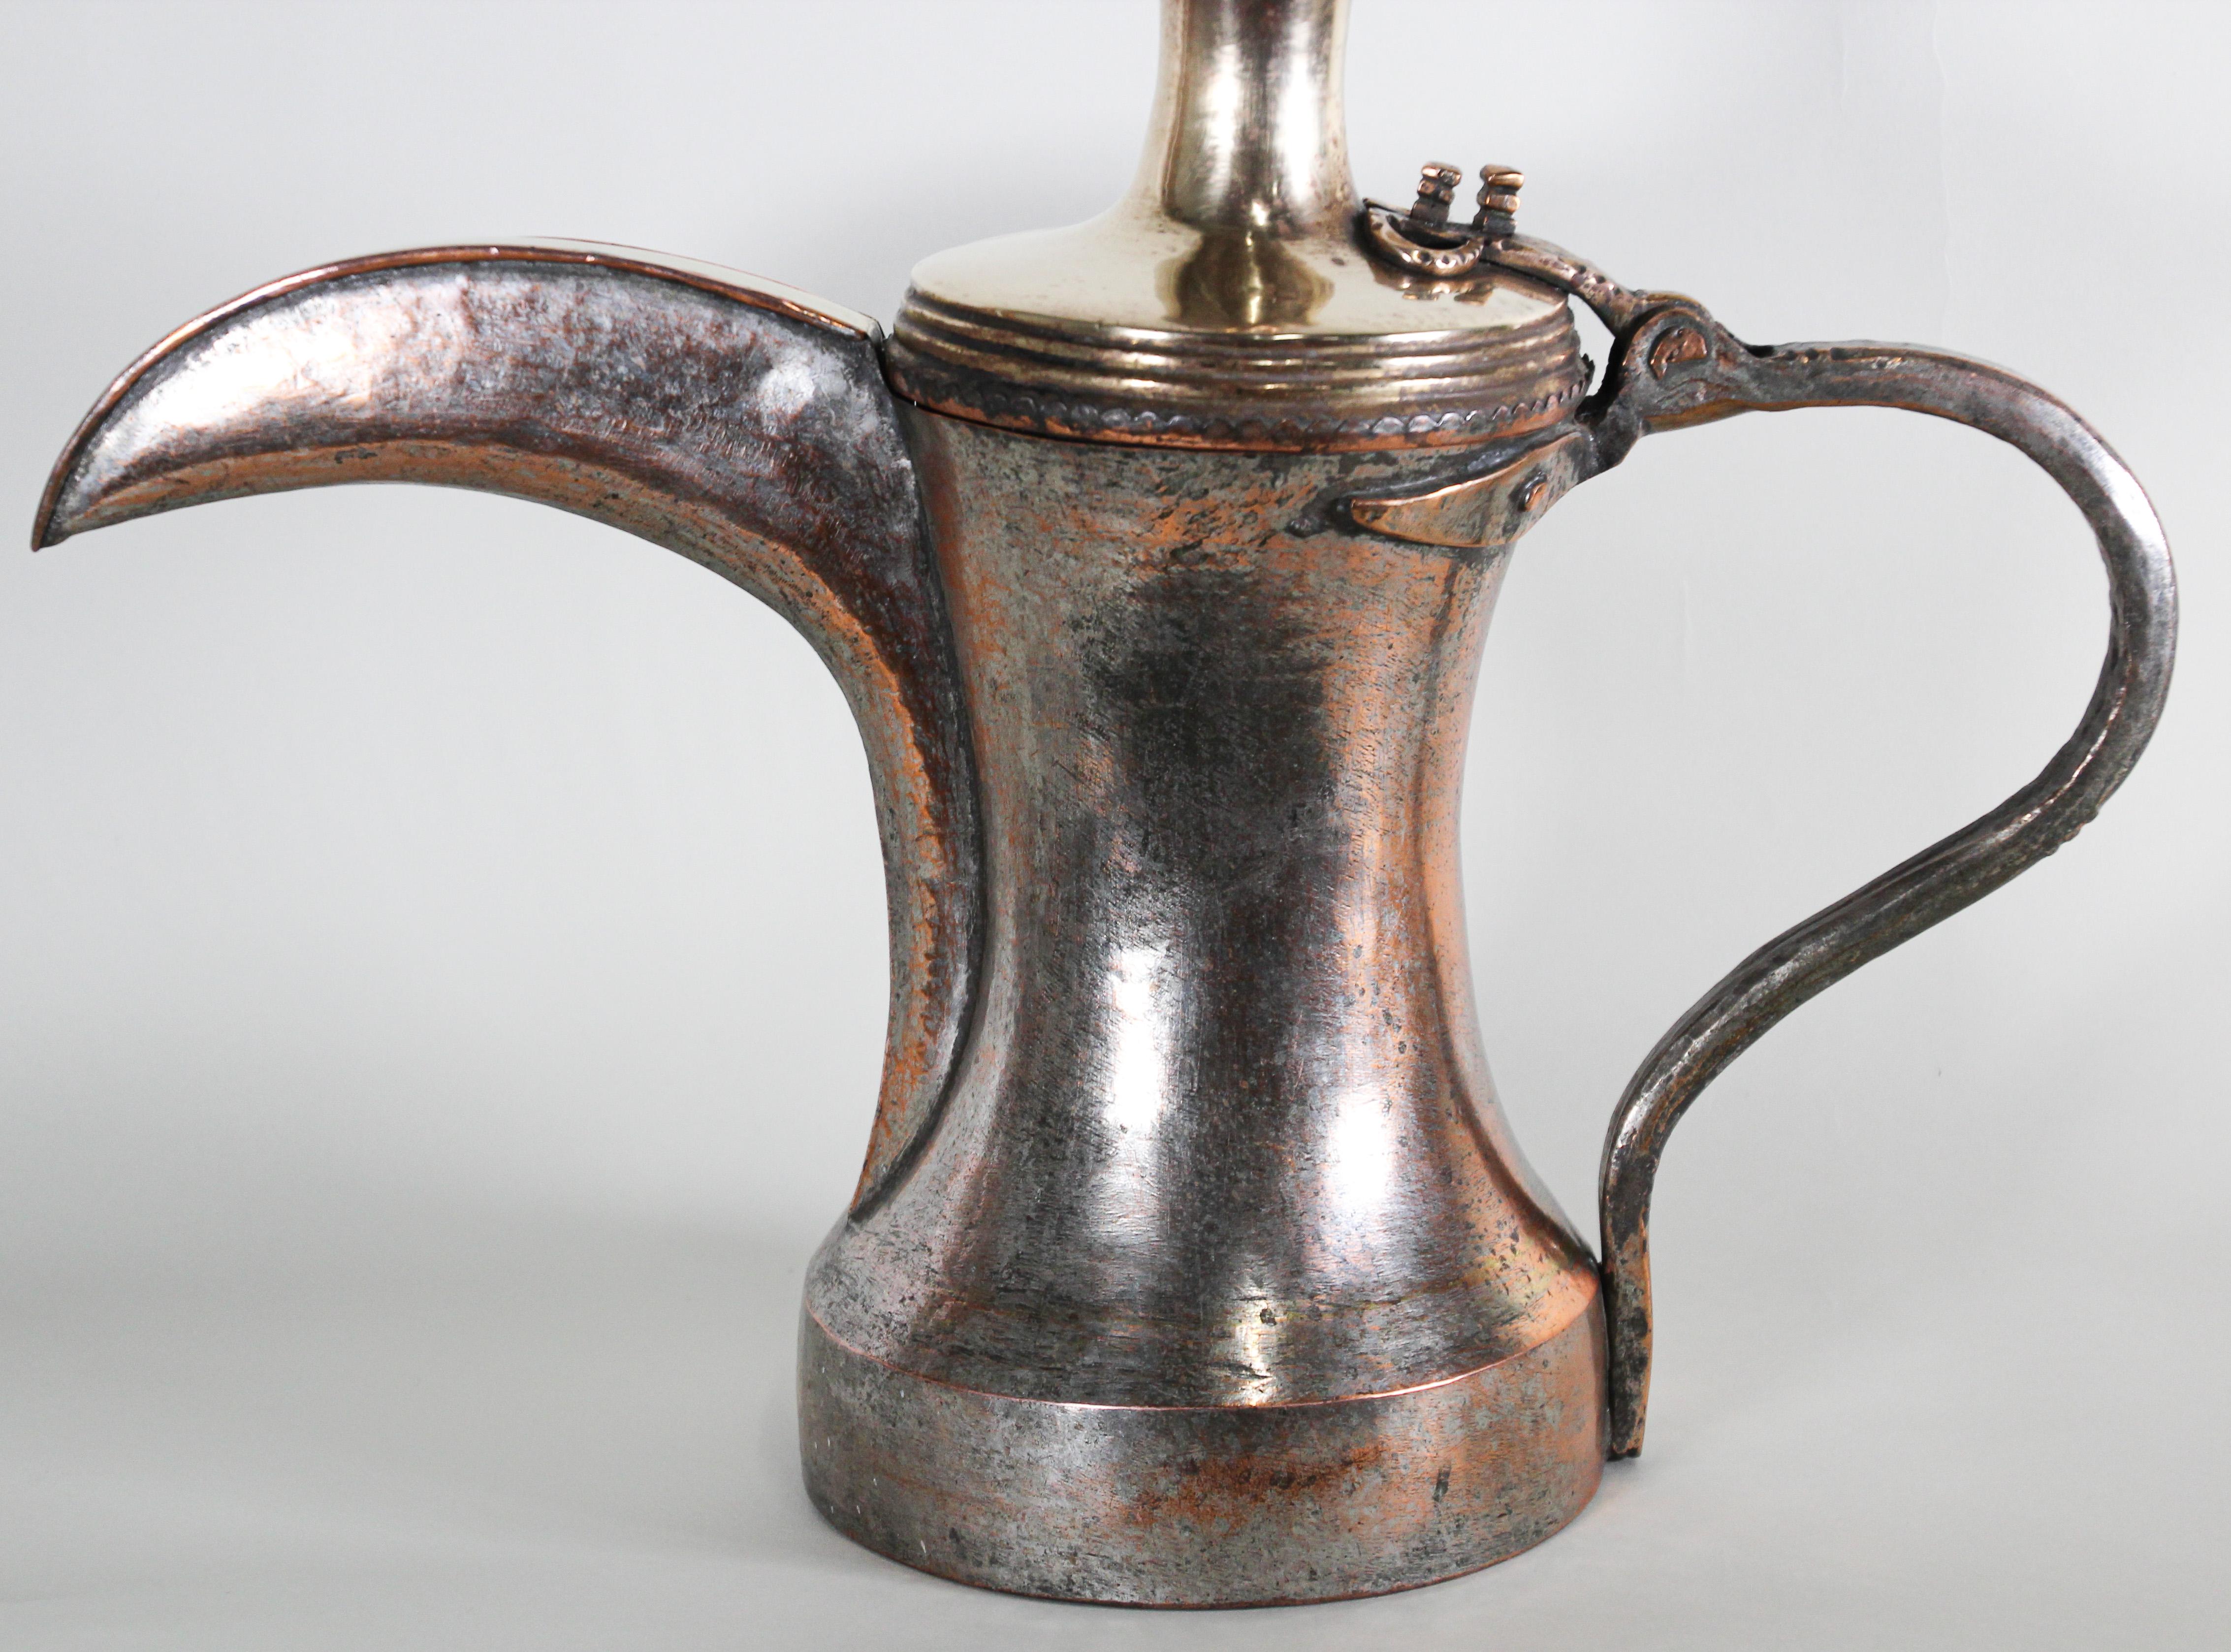 Antique 19th century Middle Eastern Dallah traditional Arabian oversized tinned copper coffee pot. 
Huge oversized decorative Arabian coffee pot hand-hammered tinned copper with riveted brass finish and a very large spout. 
Tinned copper and